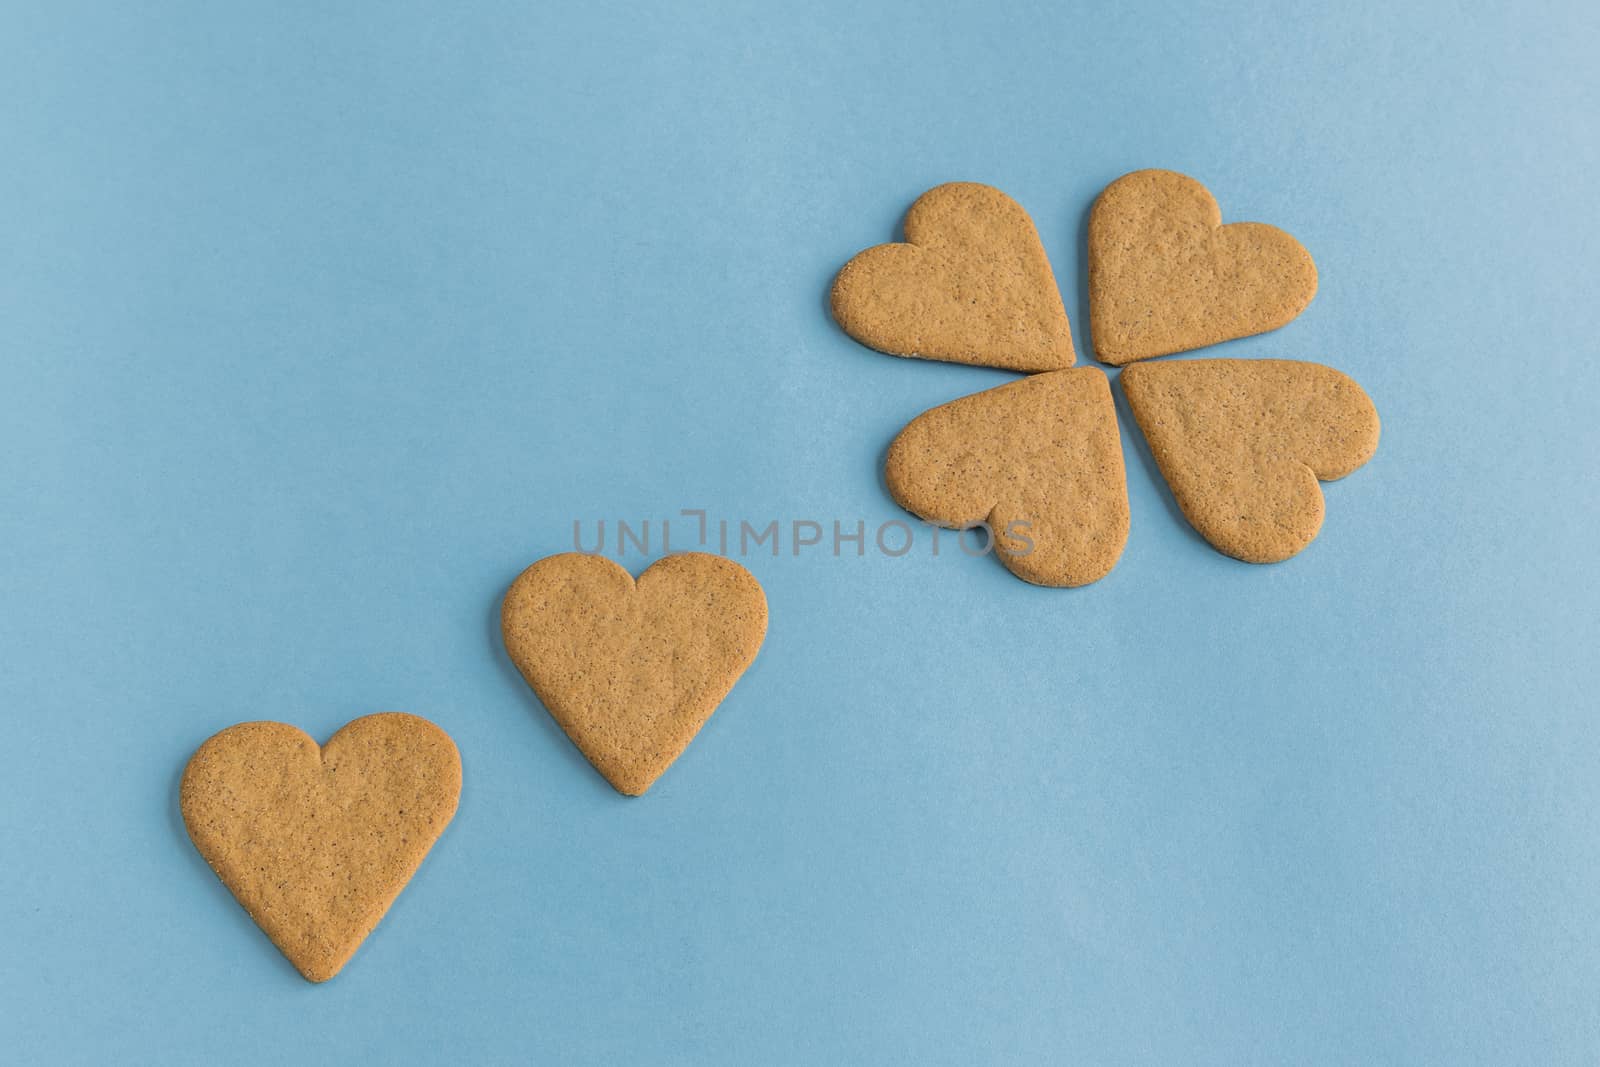 Breakfast. Close-up of heart shaped cookies like a flower petals.. Blue background. Copy space